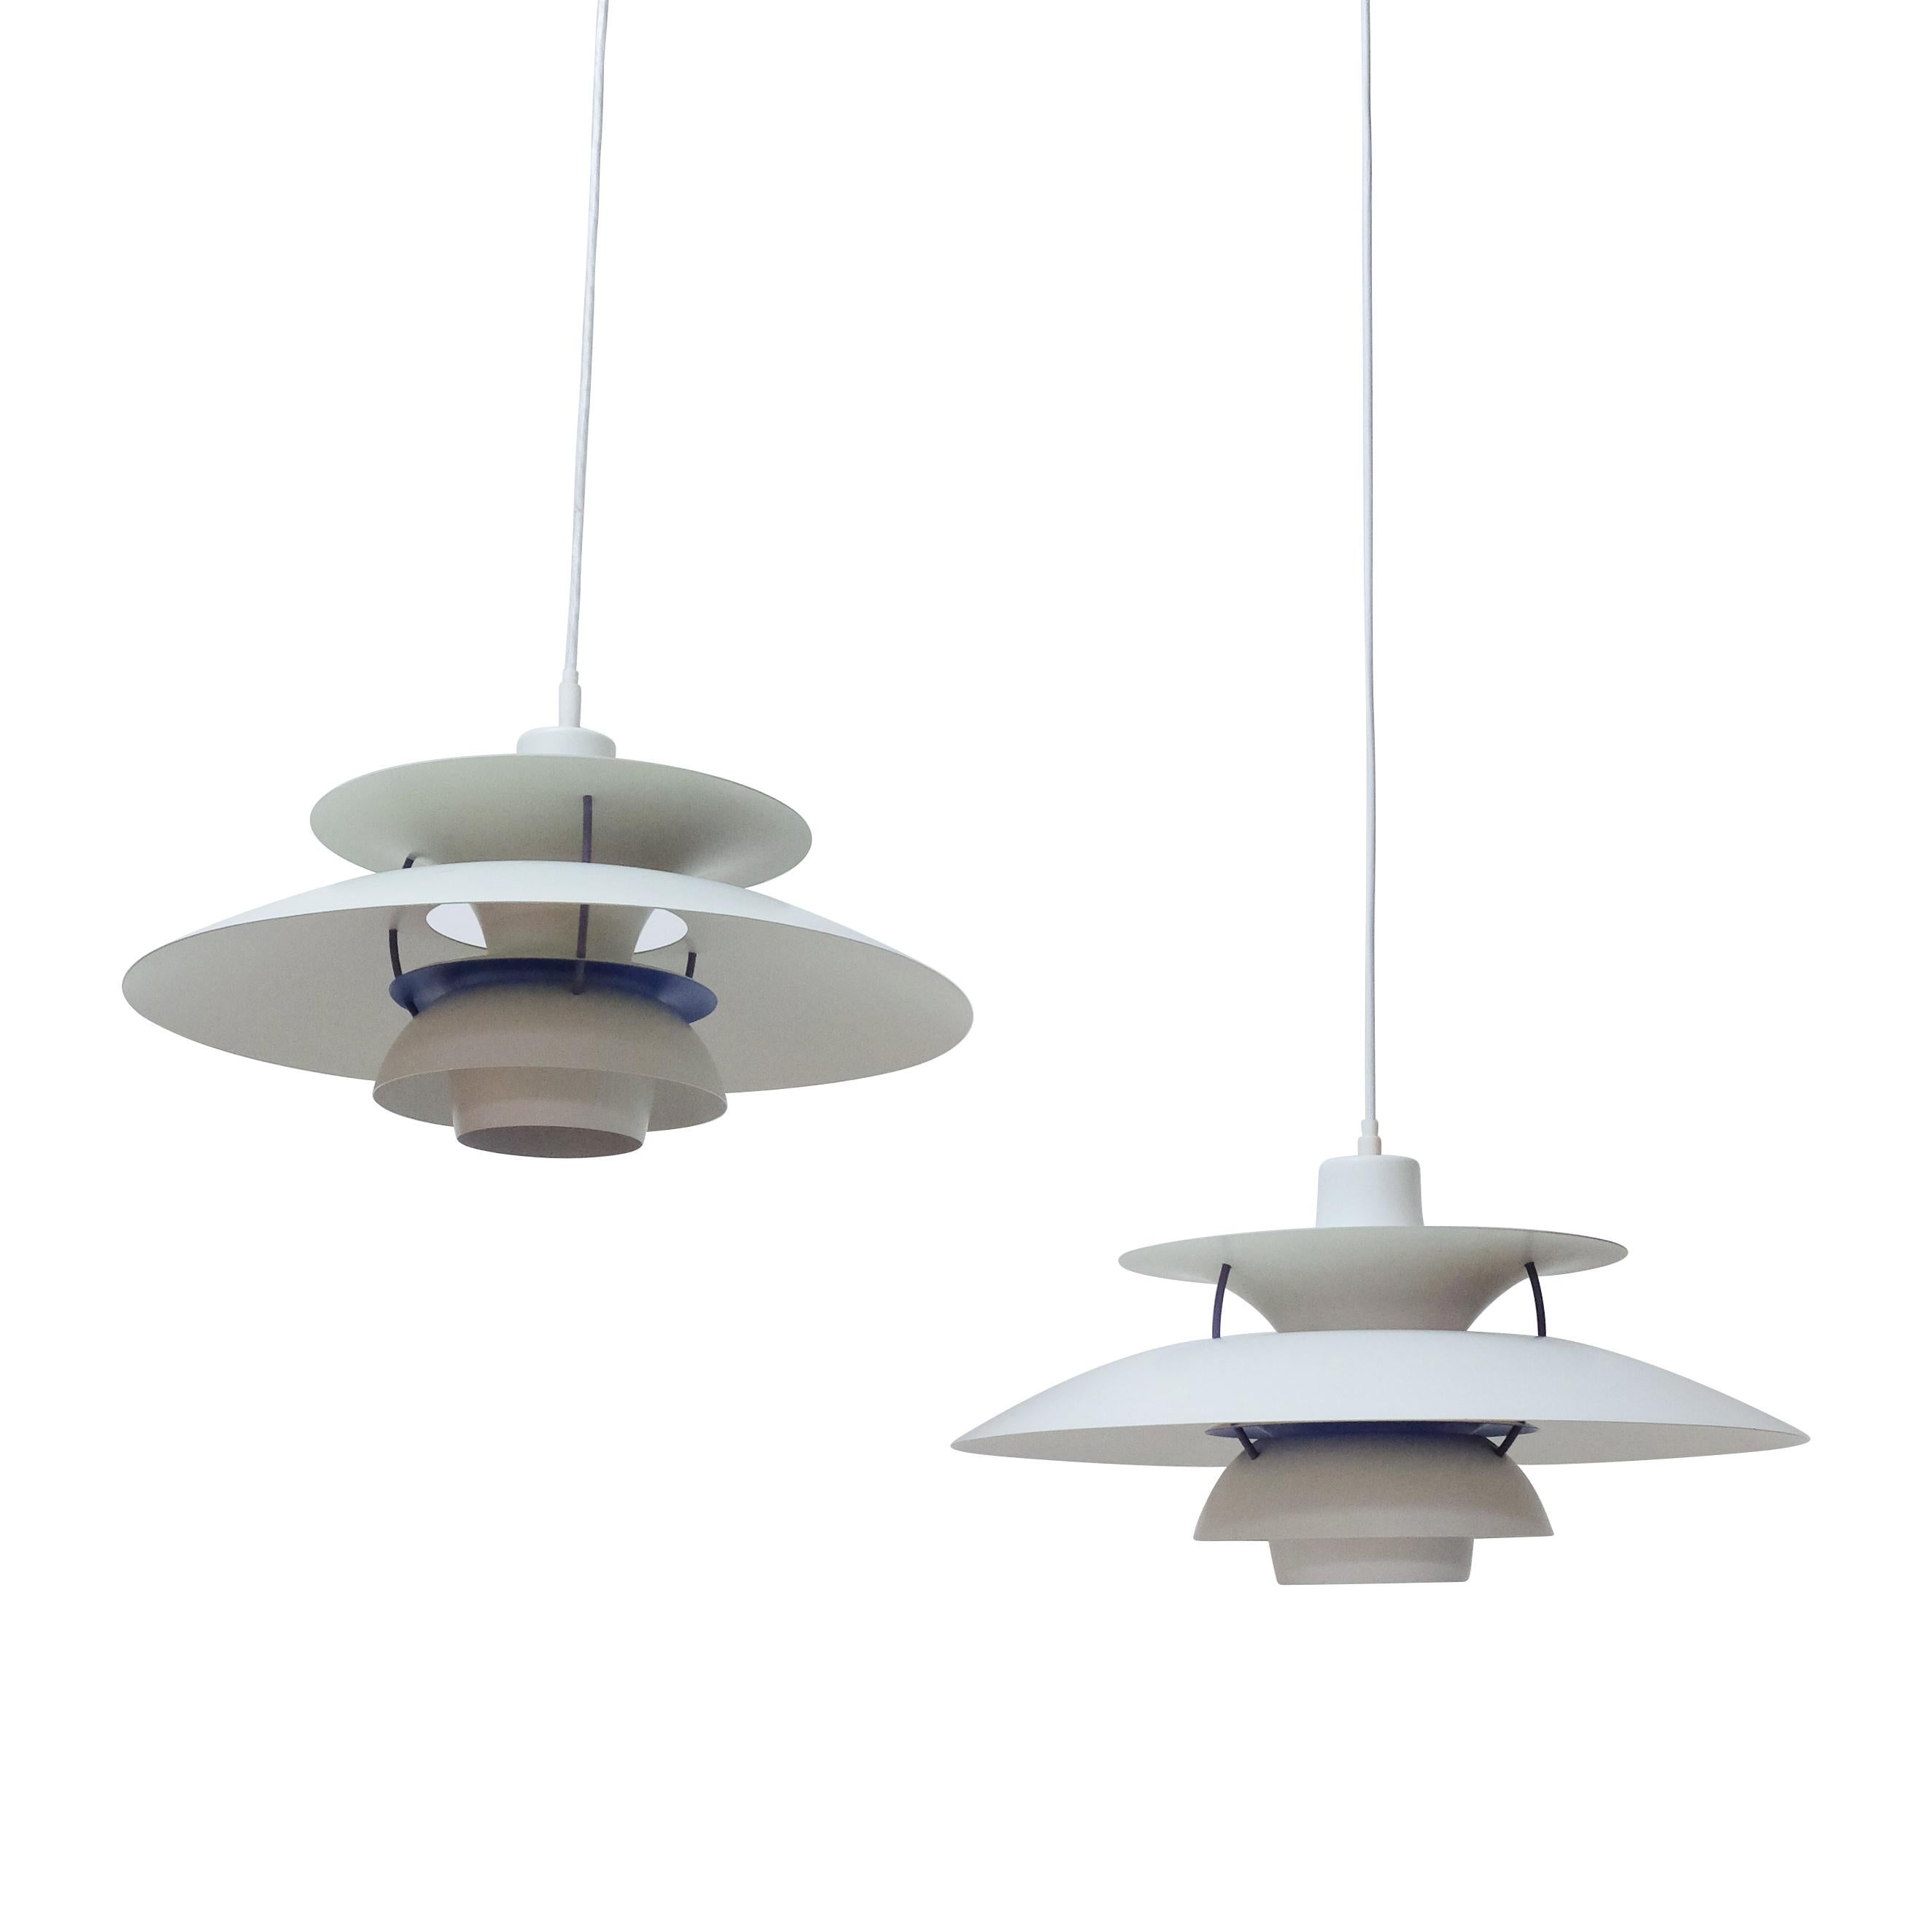 A pair of Poul Henningsen’s PH5 ceiling lamps produced by Louis Poulsen, Denmark.

The lamps are in very good condition, no scratches or noticeable signs of wear, they are tested and provided with new wiring.

Price for the pair. We have currently